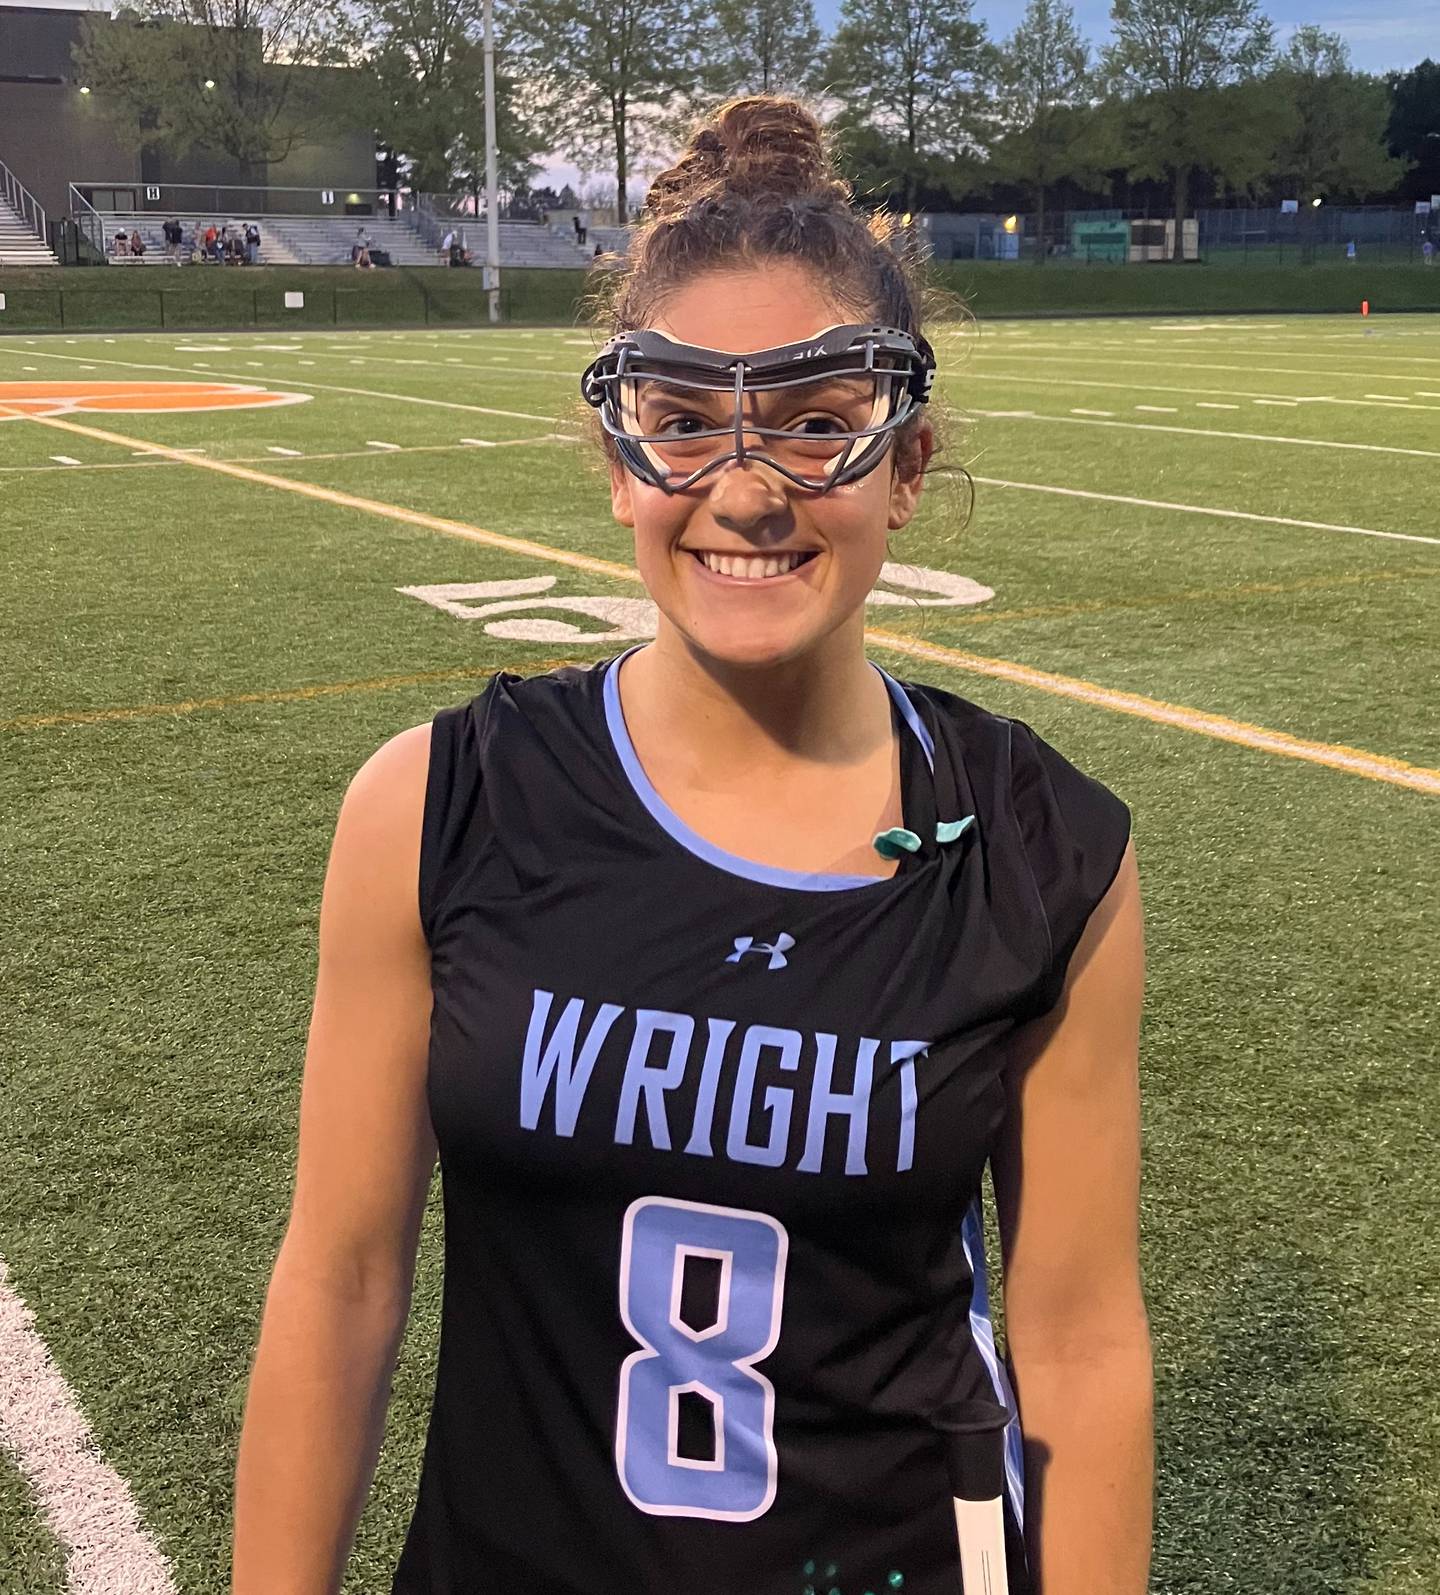 Shelby Sullivan headlined an impressive offensive showing by C. Milton Wright's girls lacrosse team Thursday evening. The junior attack, who's verbally committed to the University of Maryland, scored 6 goals as the Mustangs defeated Fallston, 19-6, in an UCBAC Chesapeake contest in Harford County.